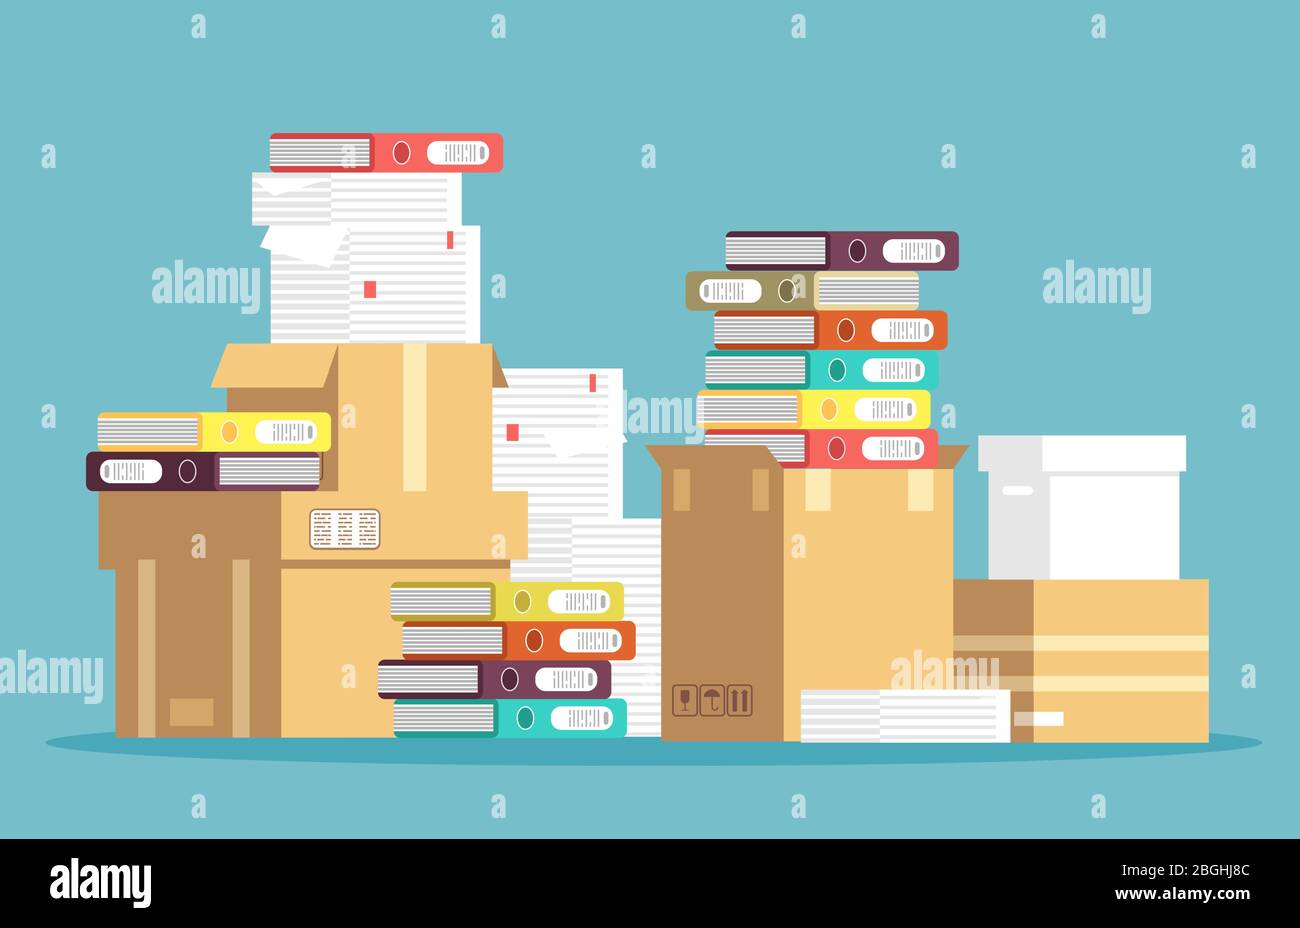 Pile of cardboard boxes, paper documents and office file folders isolated. Unorganized messy papers, paperwork vector concept. File stack, pile of paper document illustration Stock Vector